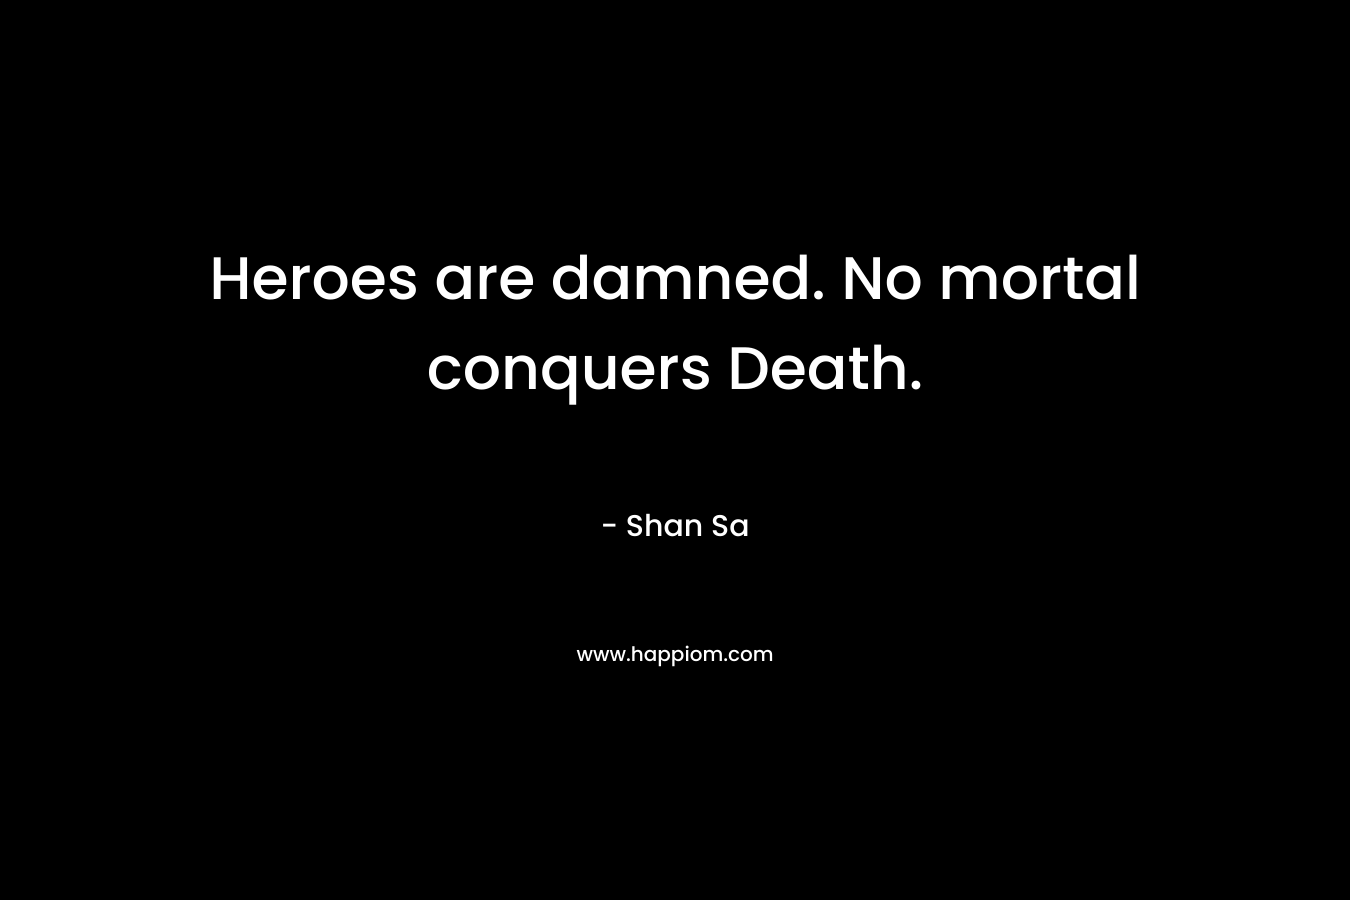 Heroes are damned. No mortal conquers Death.